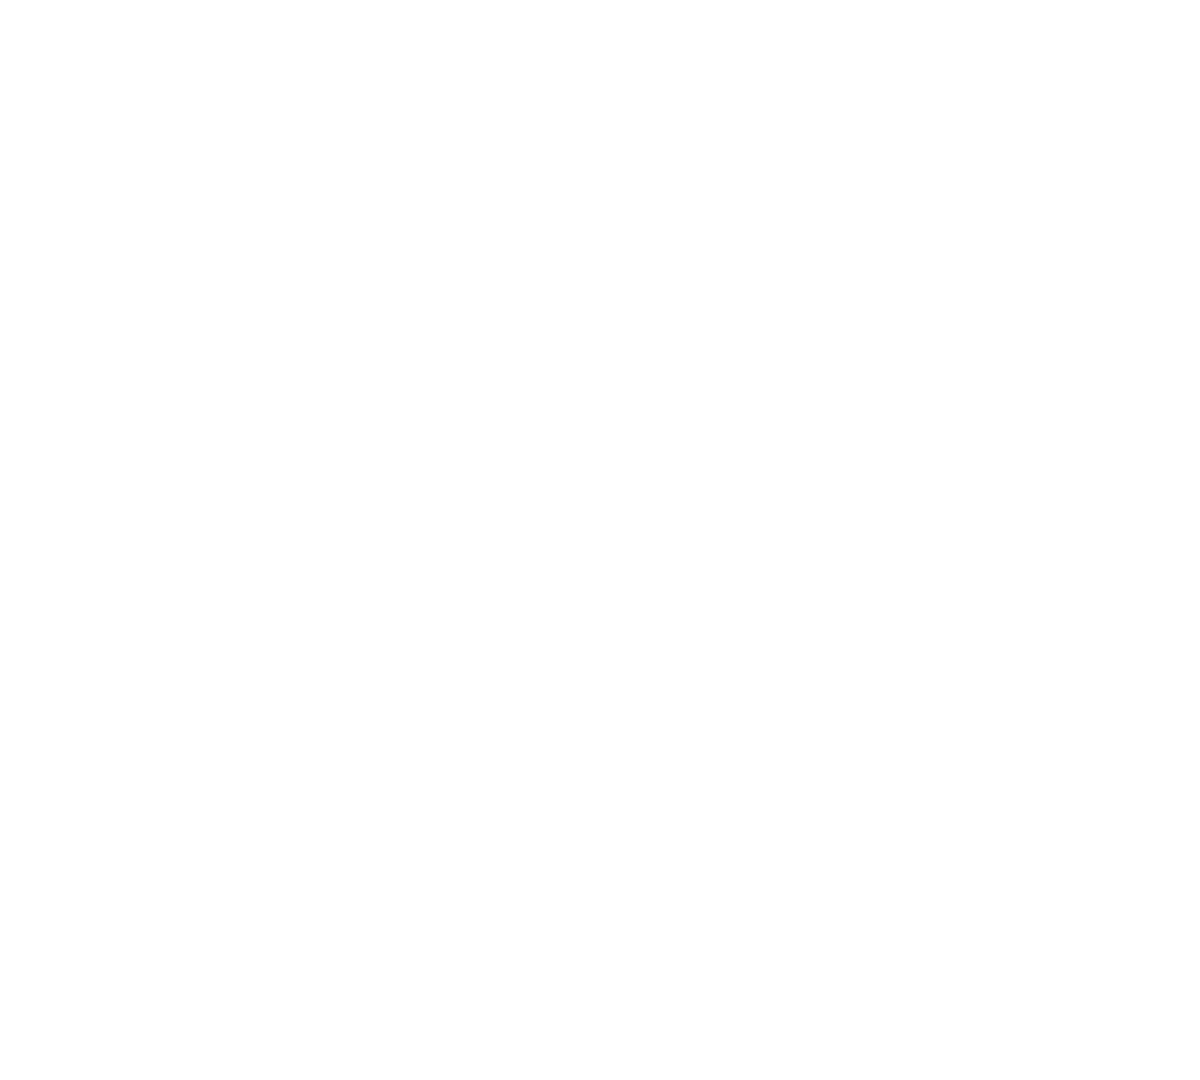 The logo for itch.io